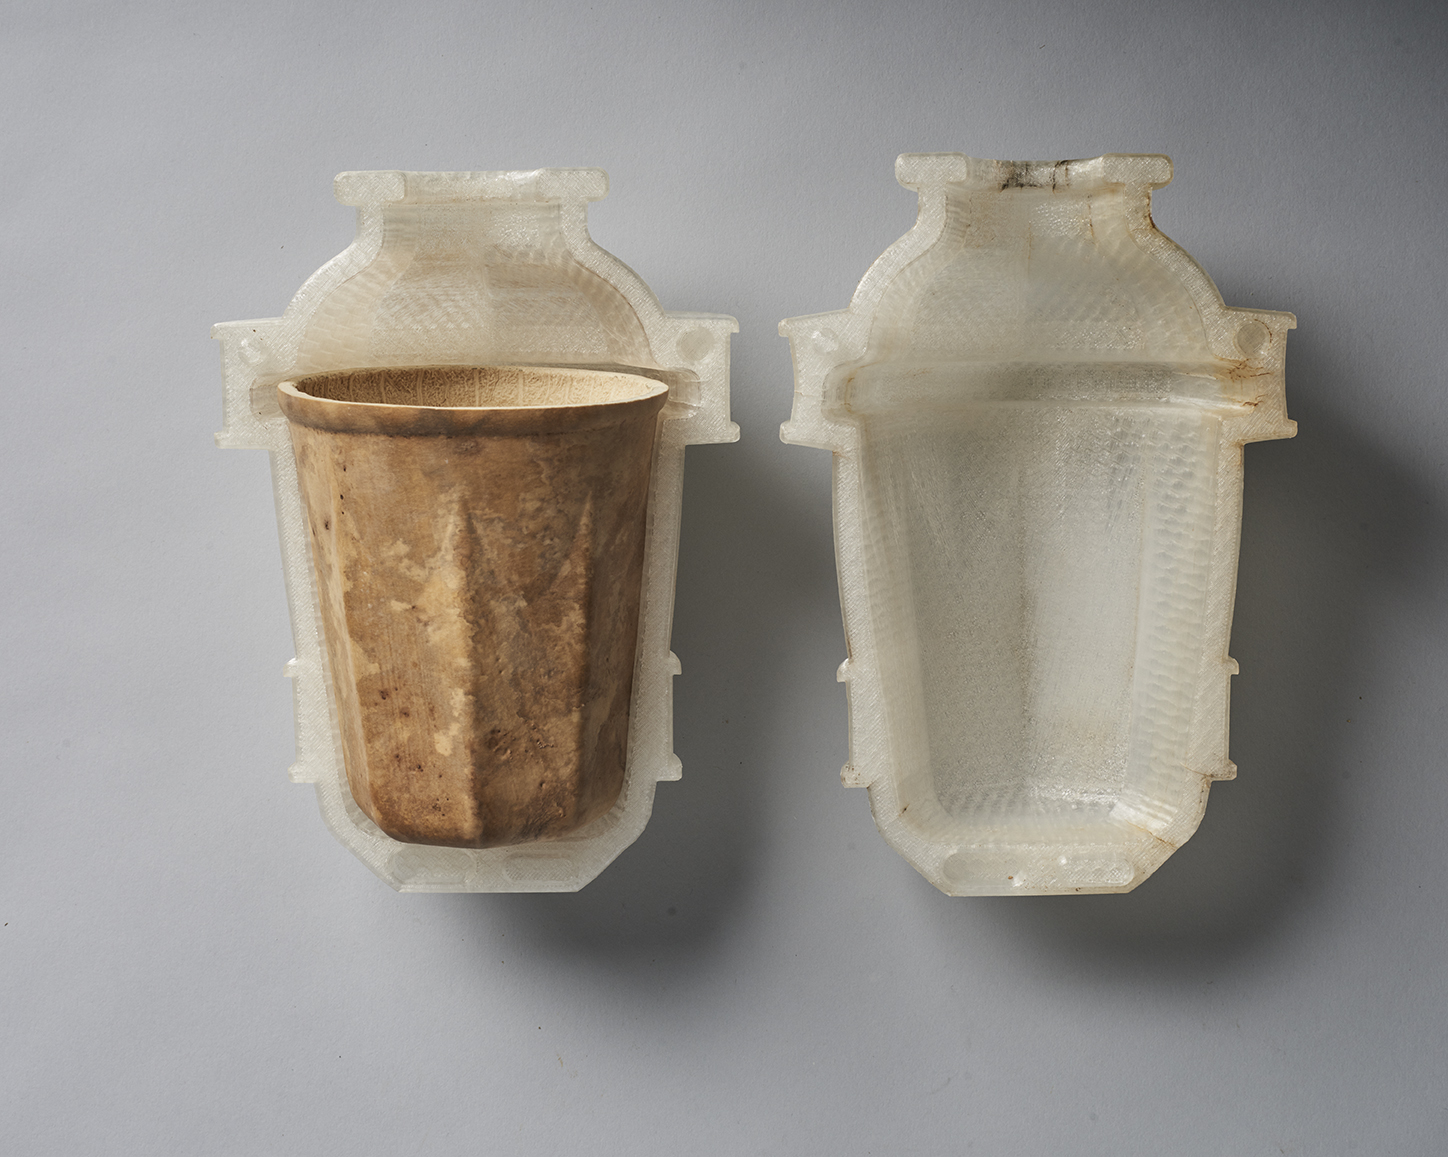 Disposable cups made from mould-grown gourds - MaterialDistrict